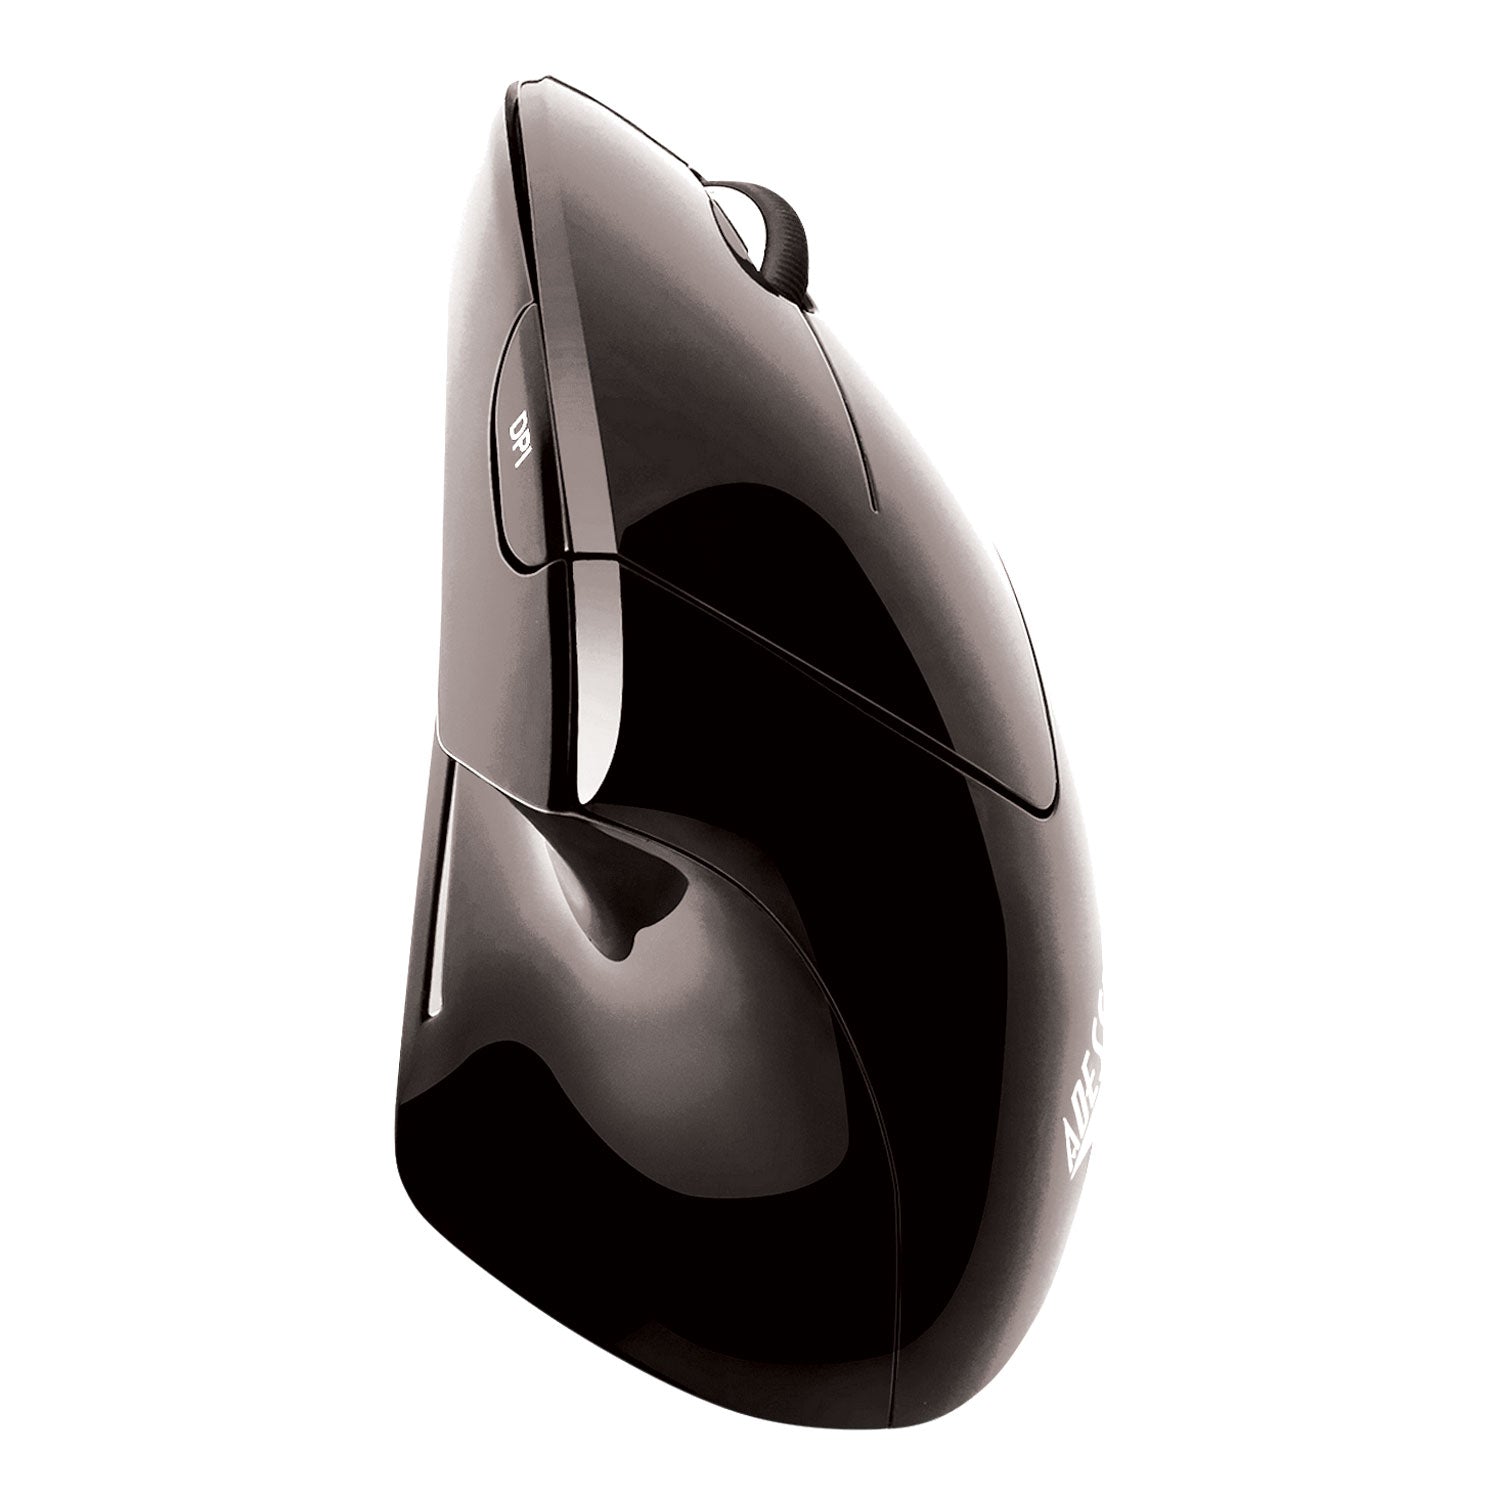 imouse-e10-wireless-vertical-ergonomic-usb-mouse-24-ghz-frequency-33-ft-wireless-range-right-hand-use-black_adeimousee10 - 2